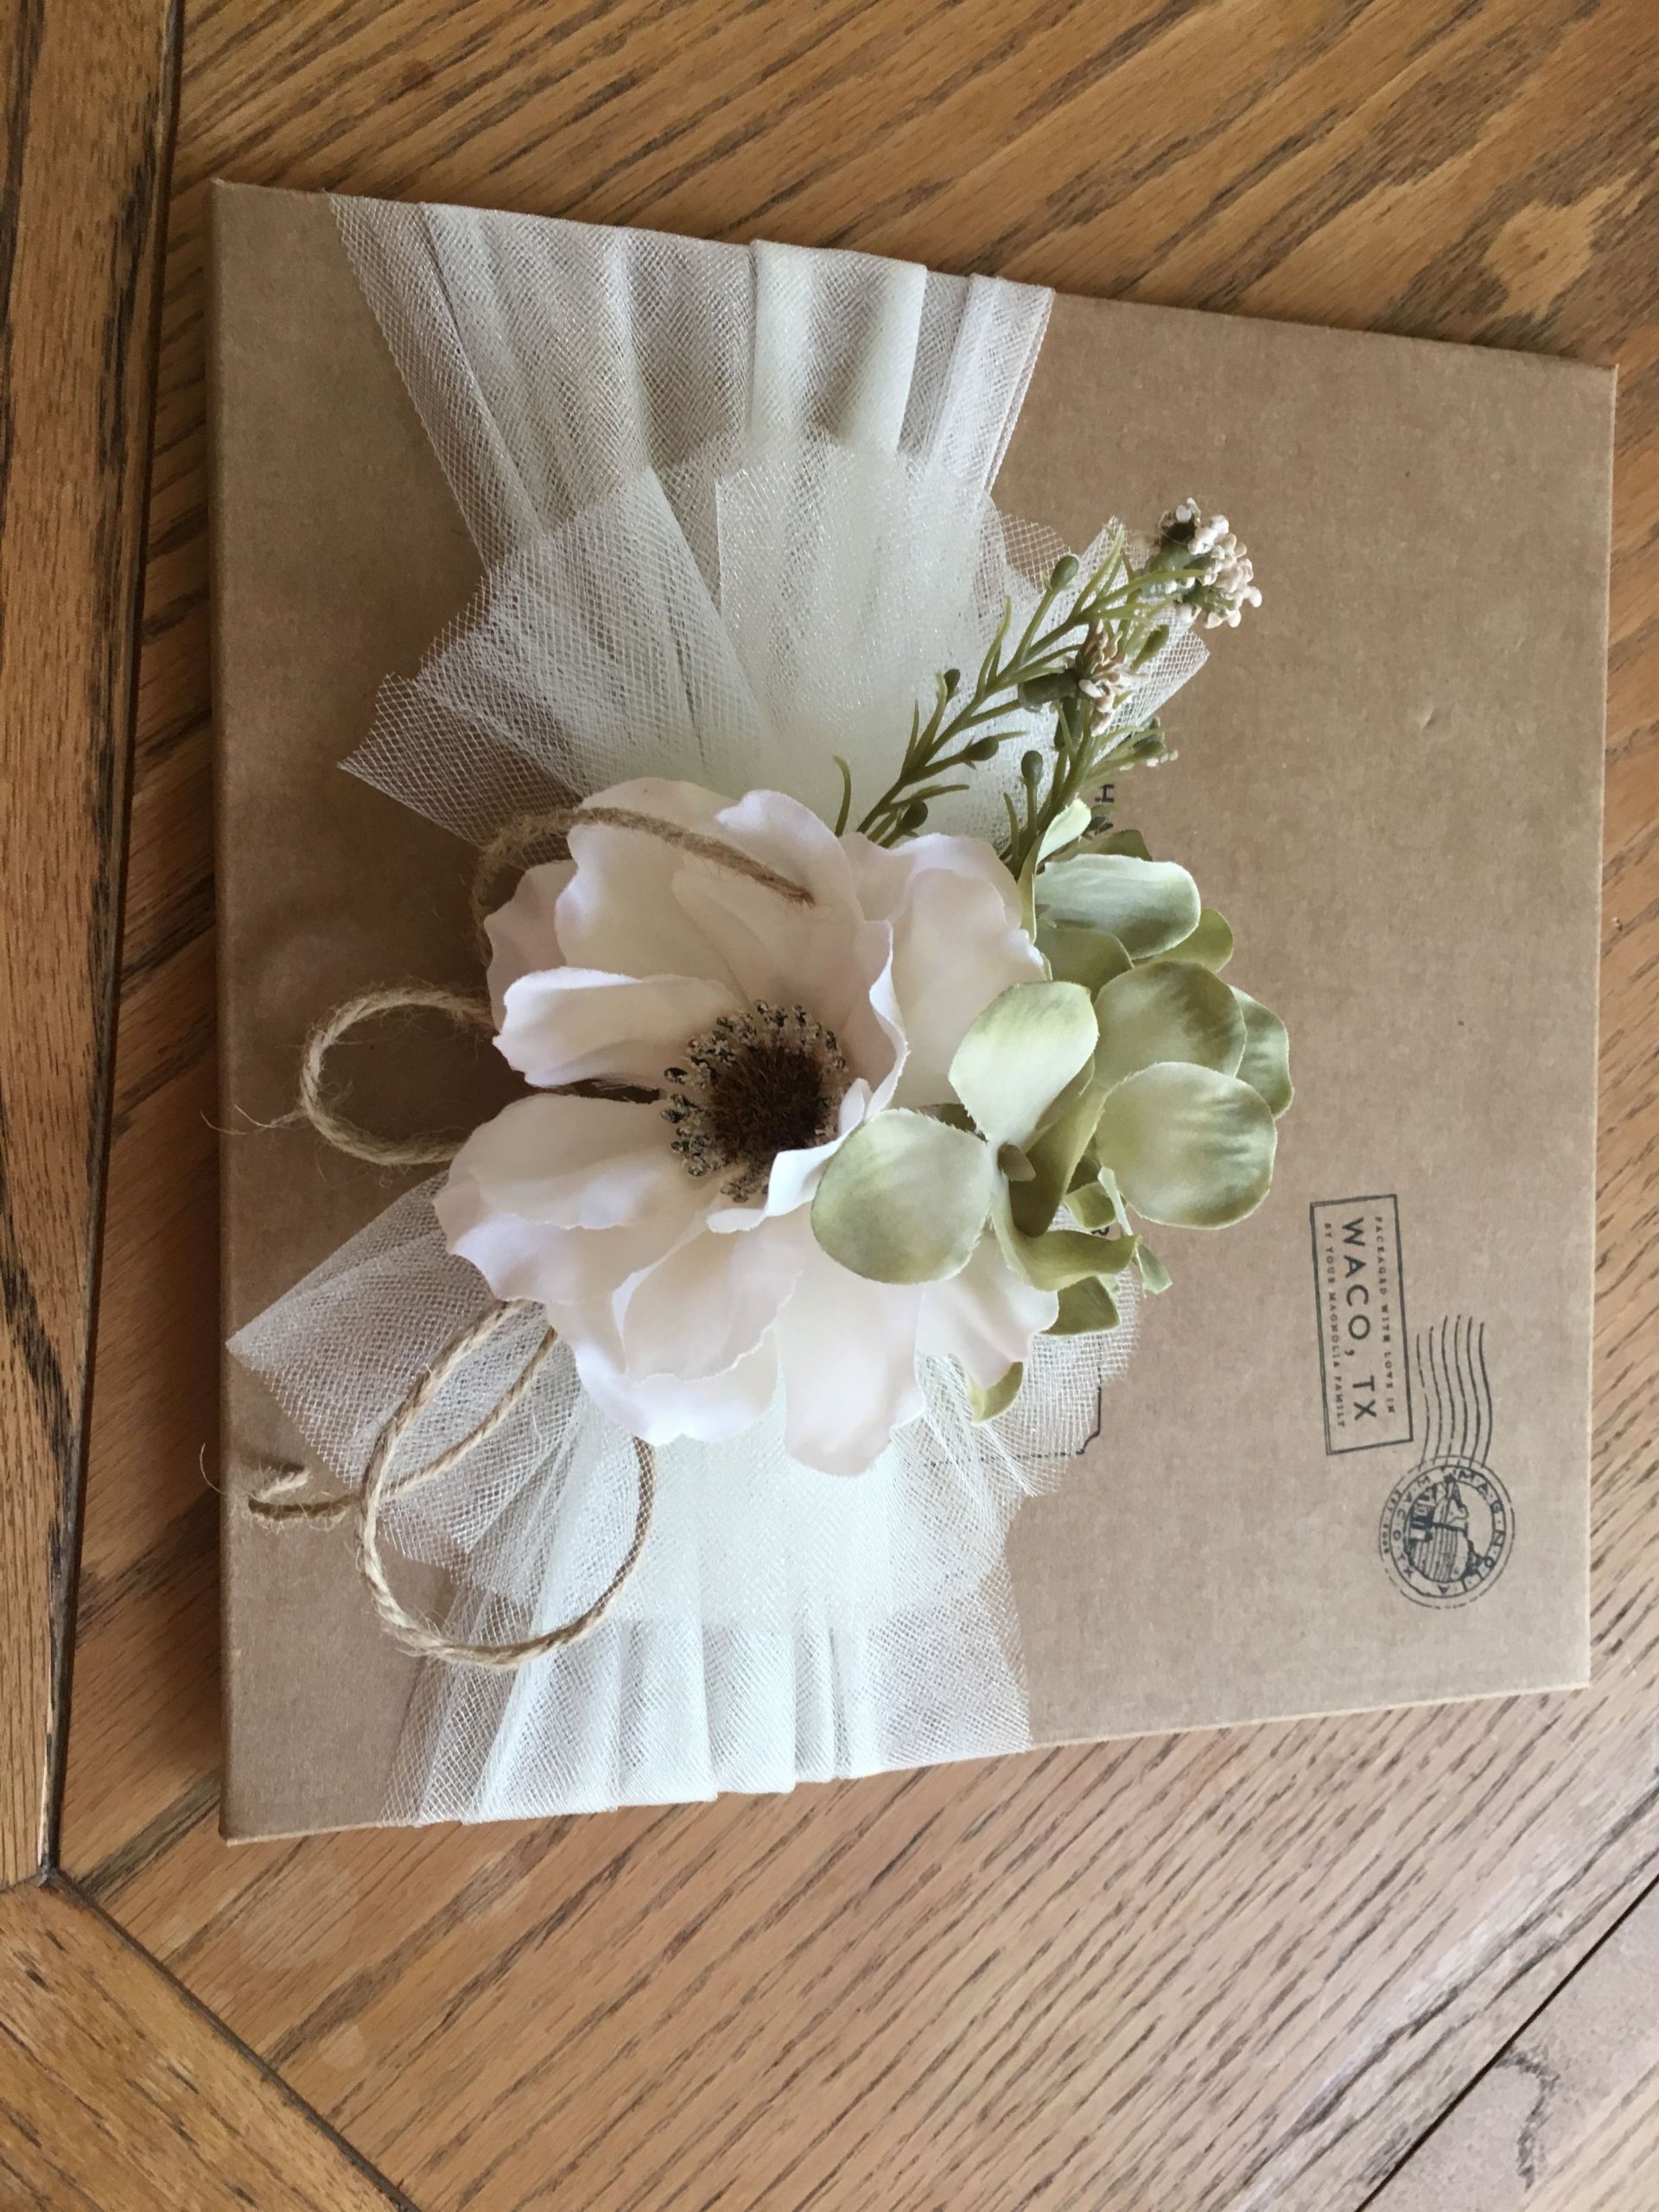 Gift Wrapping Ideas For Wedding Shower
 Bridal Shower Gift Wrap